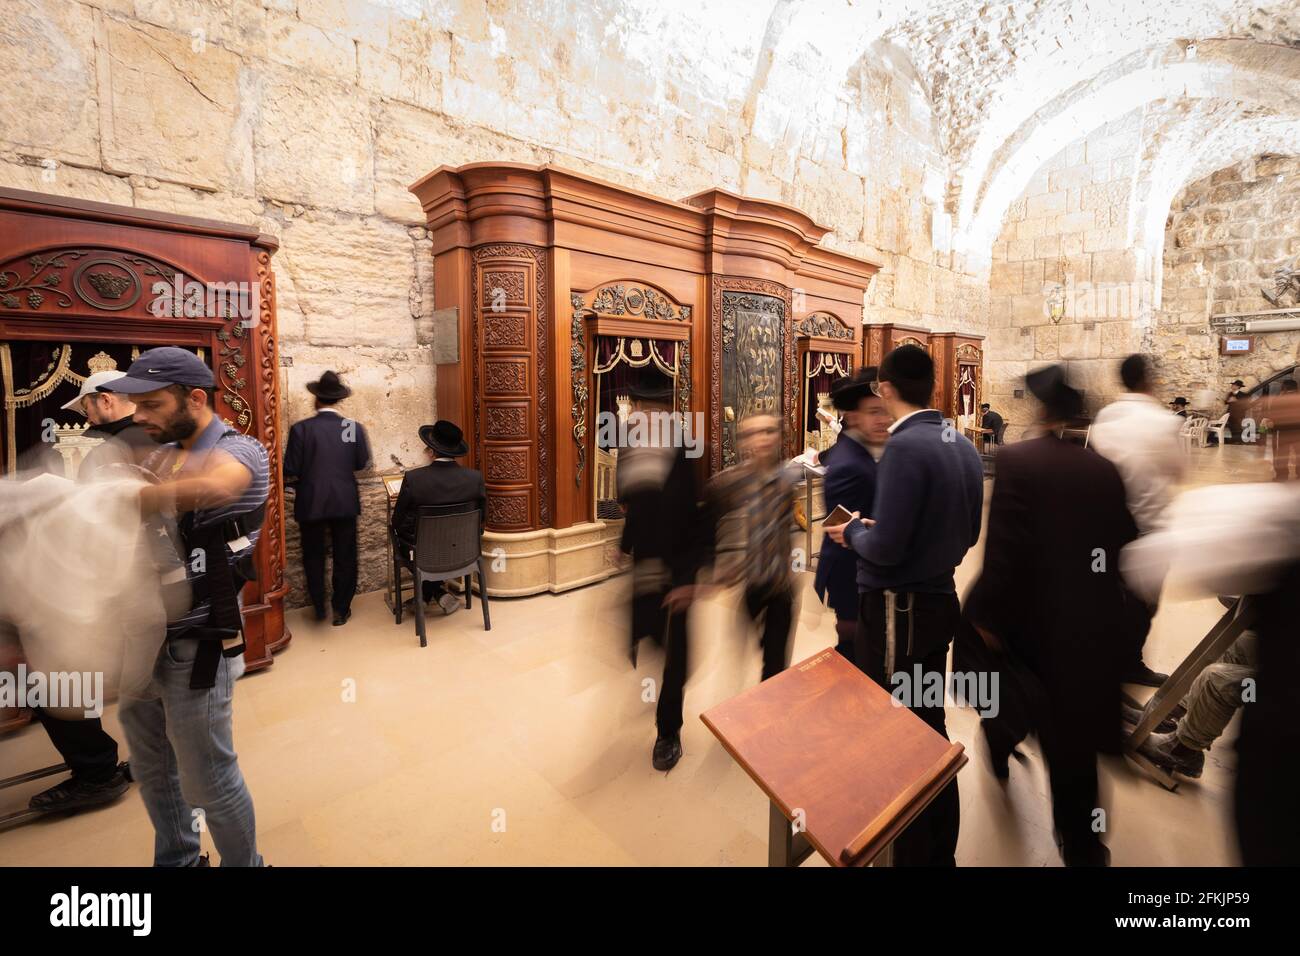 26-04-2021. jerusalem-israel. Long exposure in the synagogue in a cave at the Western Wall, at night Stock Photo